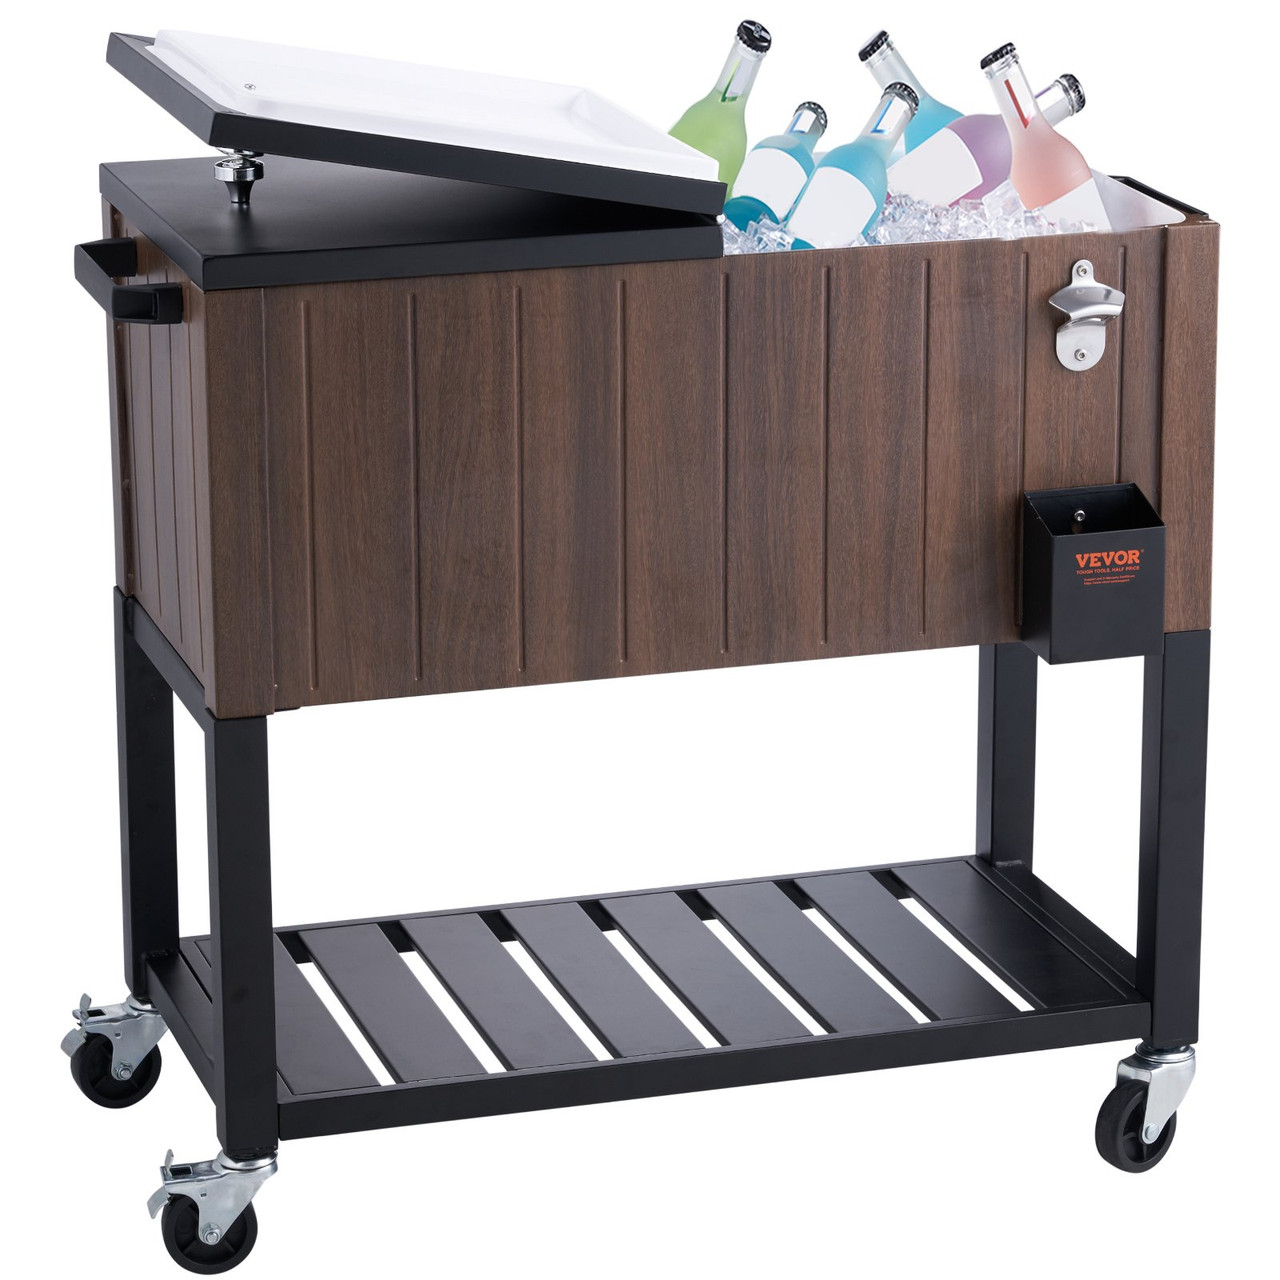 Rolling Ice Chest Cooler Cart 80 Quart, Portable Bar Drink Cooler, Beverage Bar Stand Up Cooler with Wheels, Bottle Opener, Handles for Patio Backyard Party Pool, Wooden Teak Accent, Brown